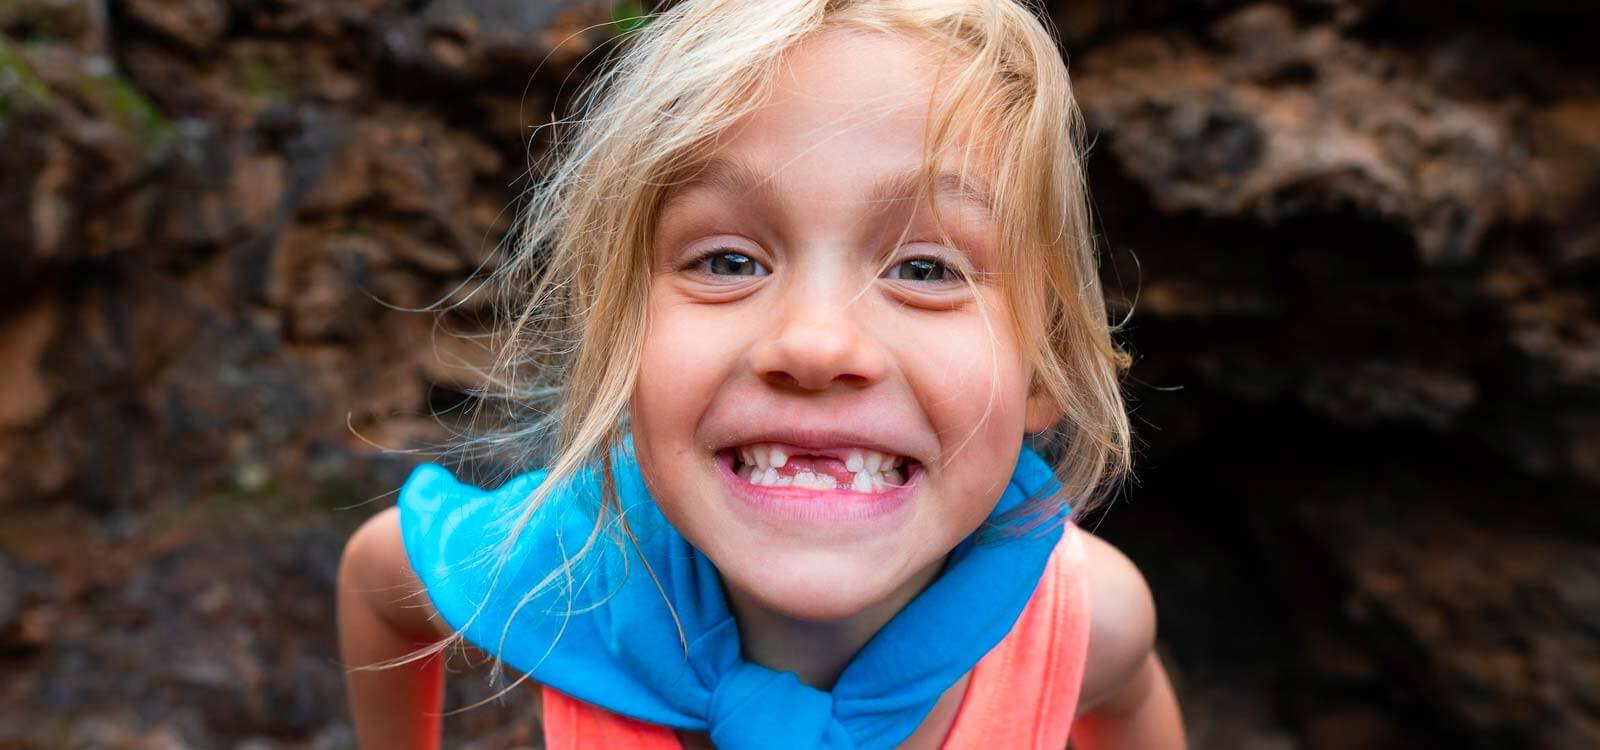 Common Orthodontic Issues in Children: 4 Signs to Watch Out For